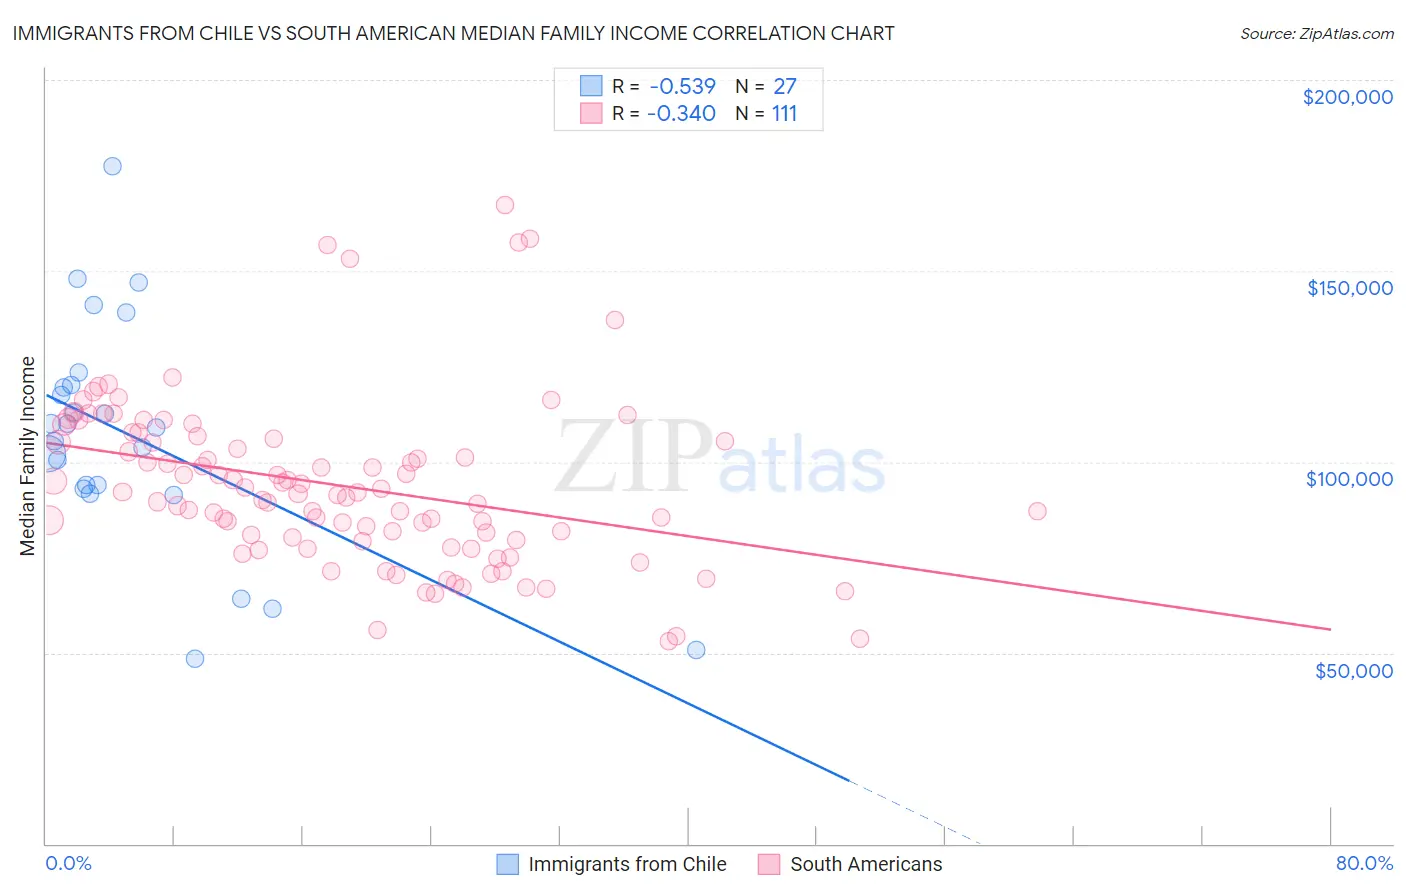 Immigrants from Chile vs South American Median Family Income